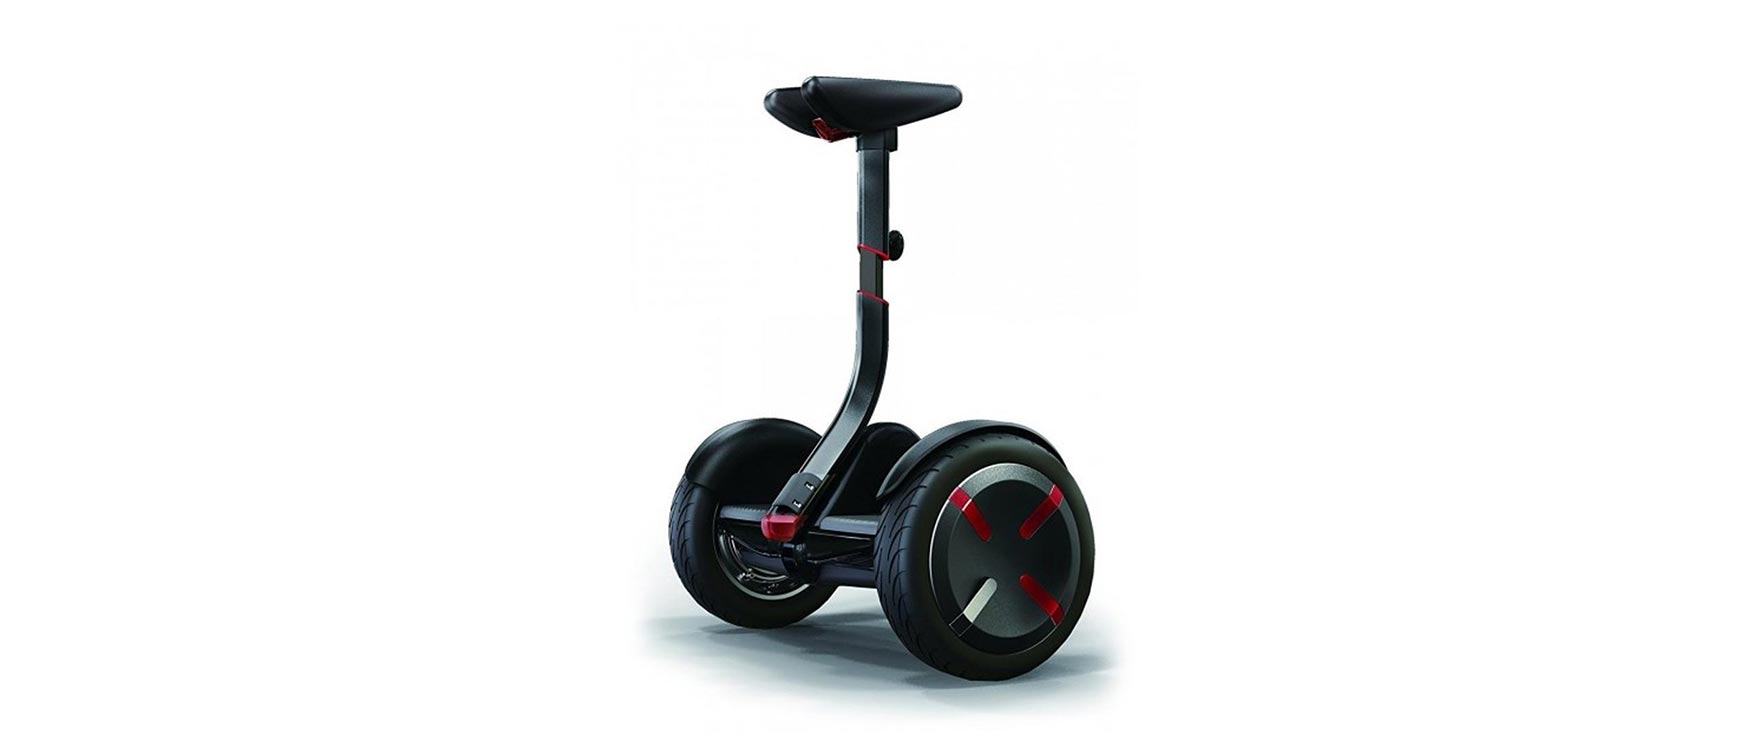 3. SEGWAY miniPRO Hoverboard